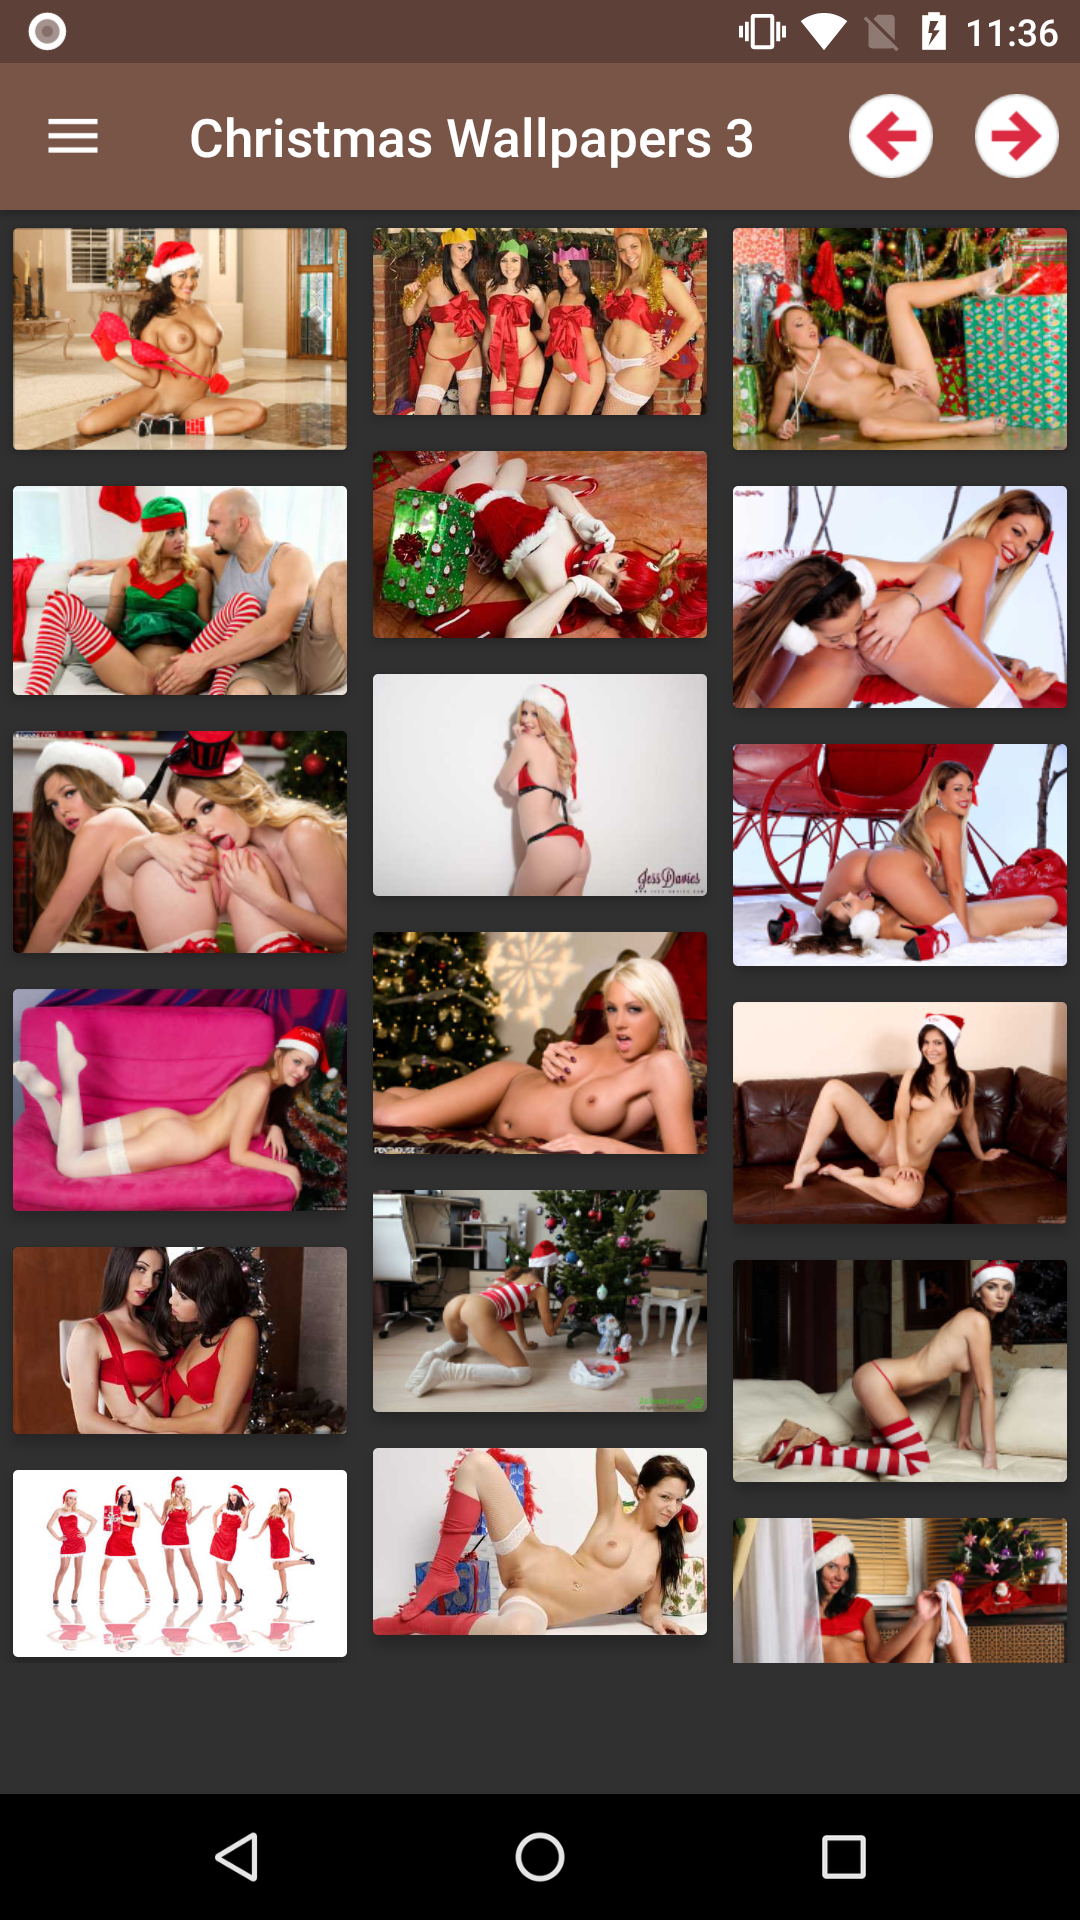 Sexy Christmas Wallpapers 2 pictires,porn,pic,phone,backgrounds,for,hentai,app,android,apps,hot,erotic,gallery,wallpapers,hotebonypics,picture,holidays,sexy,anime